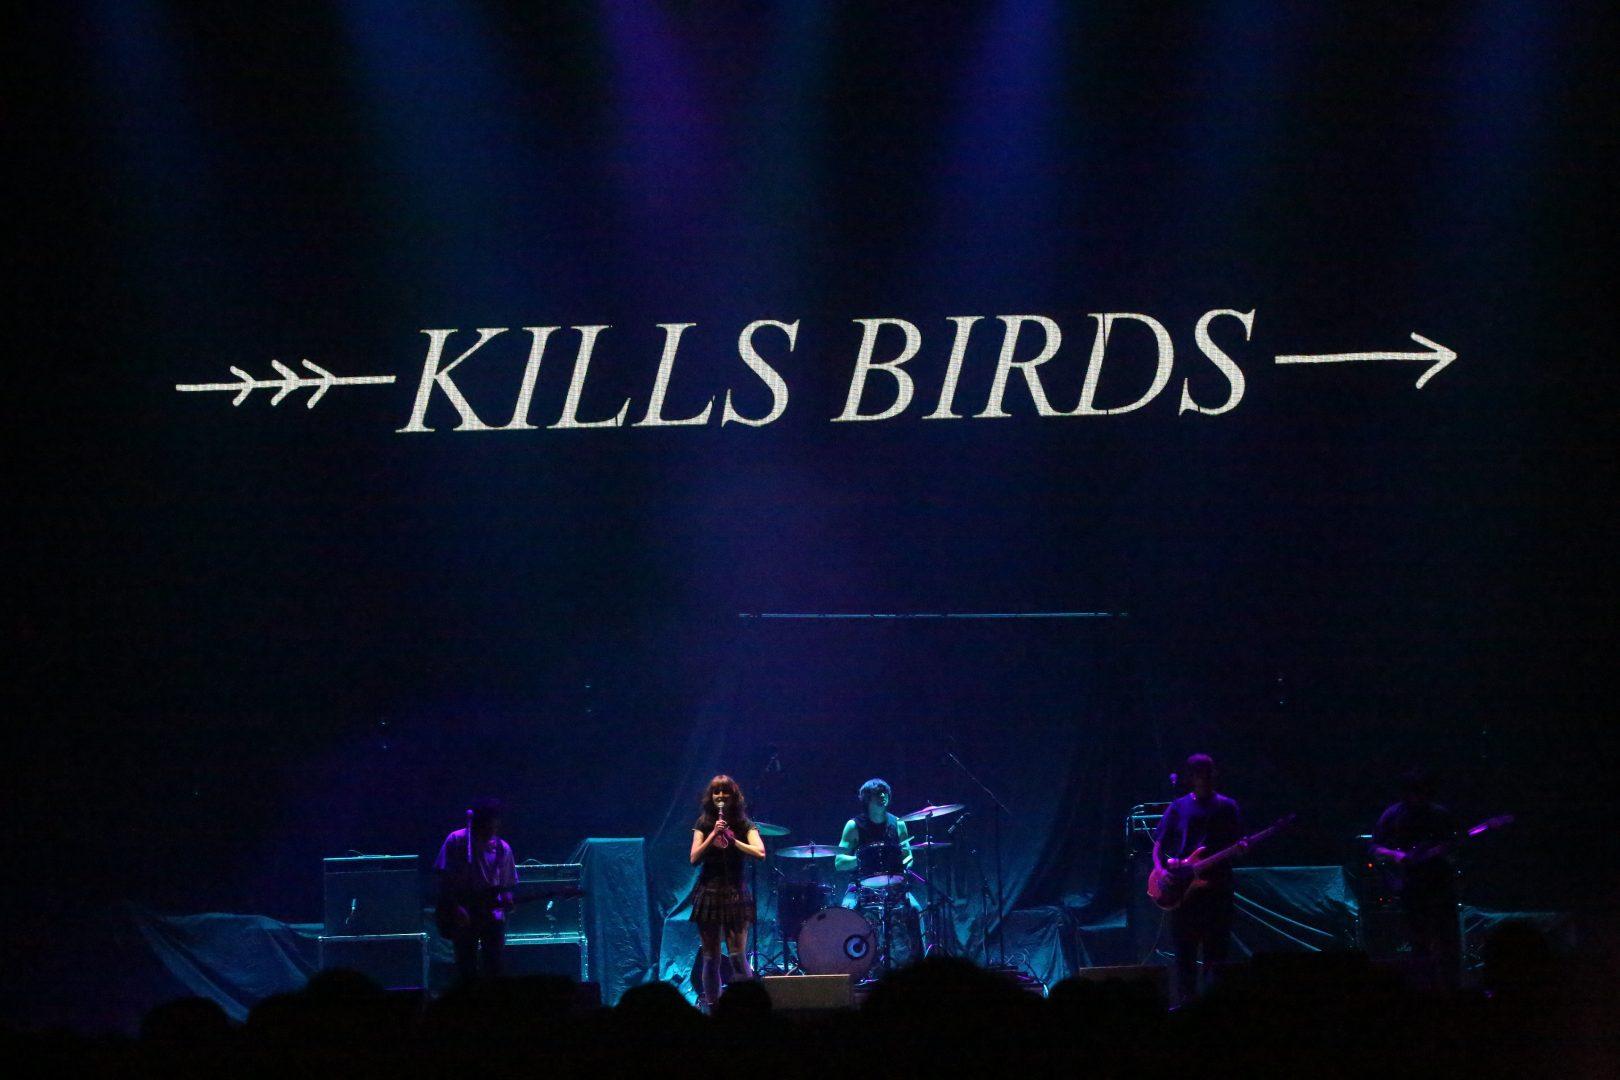 Kills Birds performs before an audience at the Save Mart Center. (JesÃºs Cano/The Collegian)